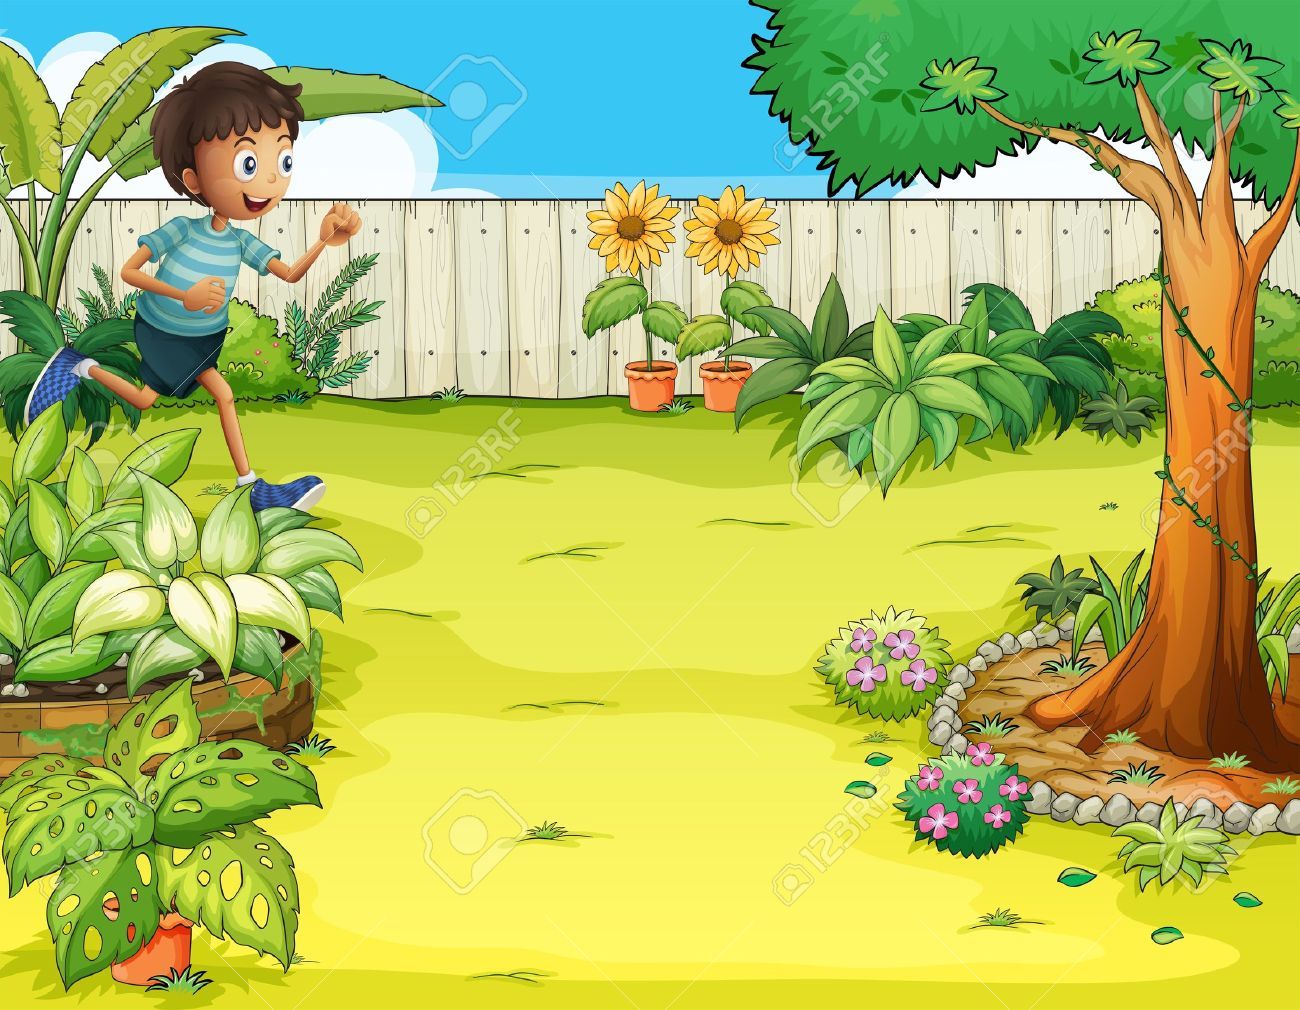 country clipart backyard